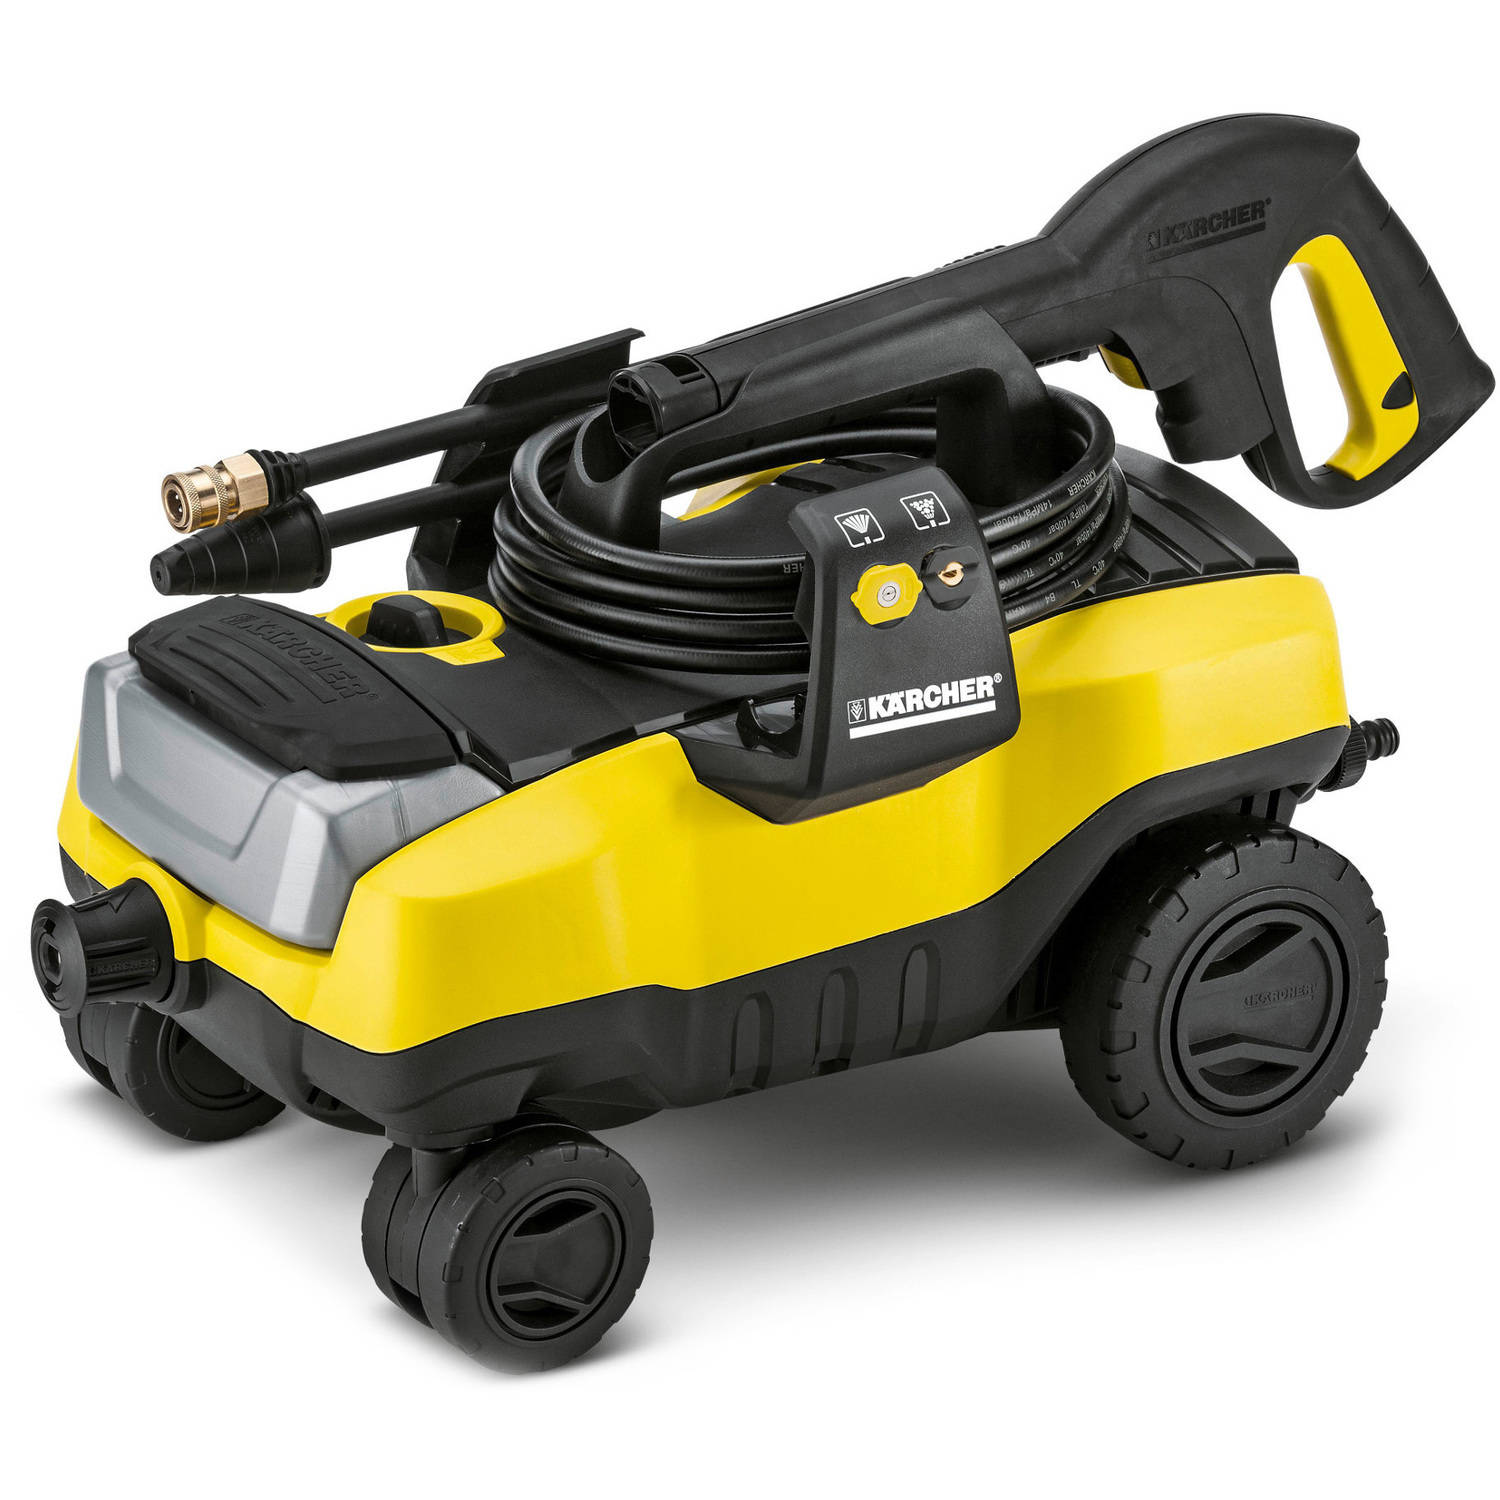 Karcher K3 Follow Me Universal 1700 PSI Electric Pressure Washer - image 1 of 4